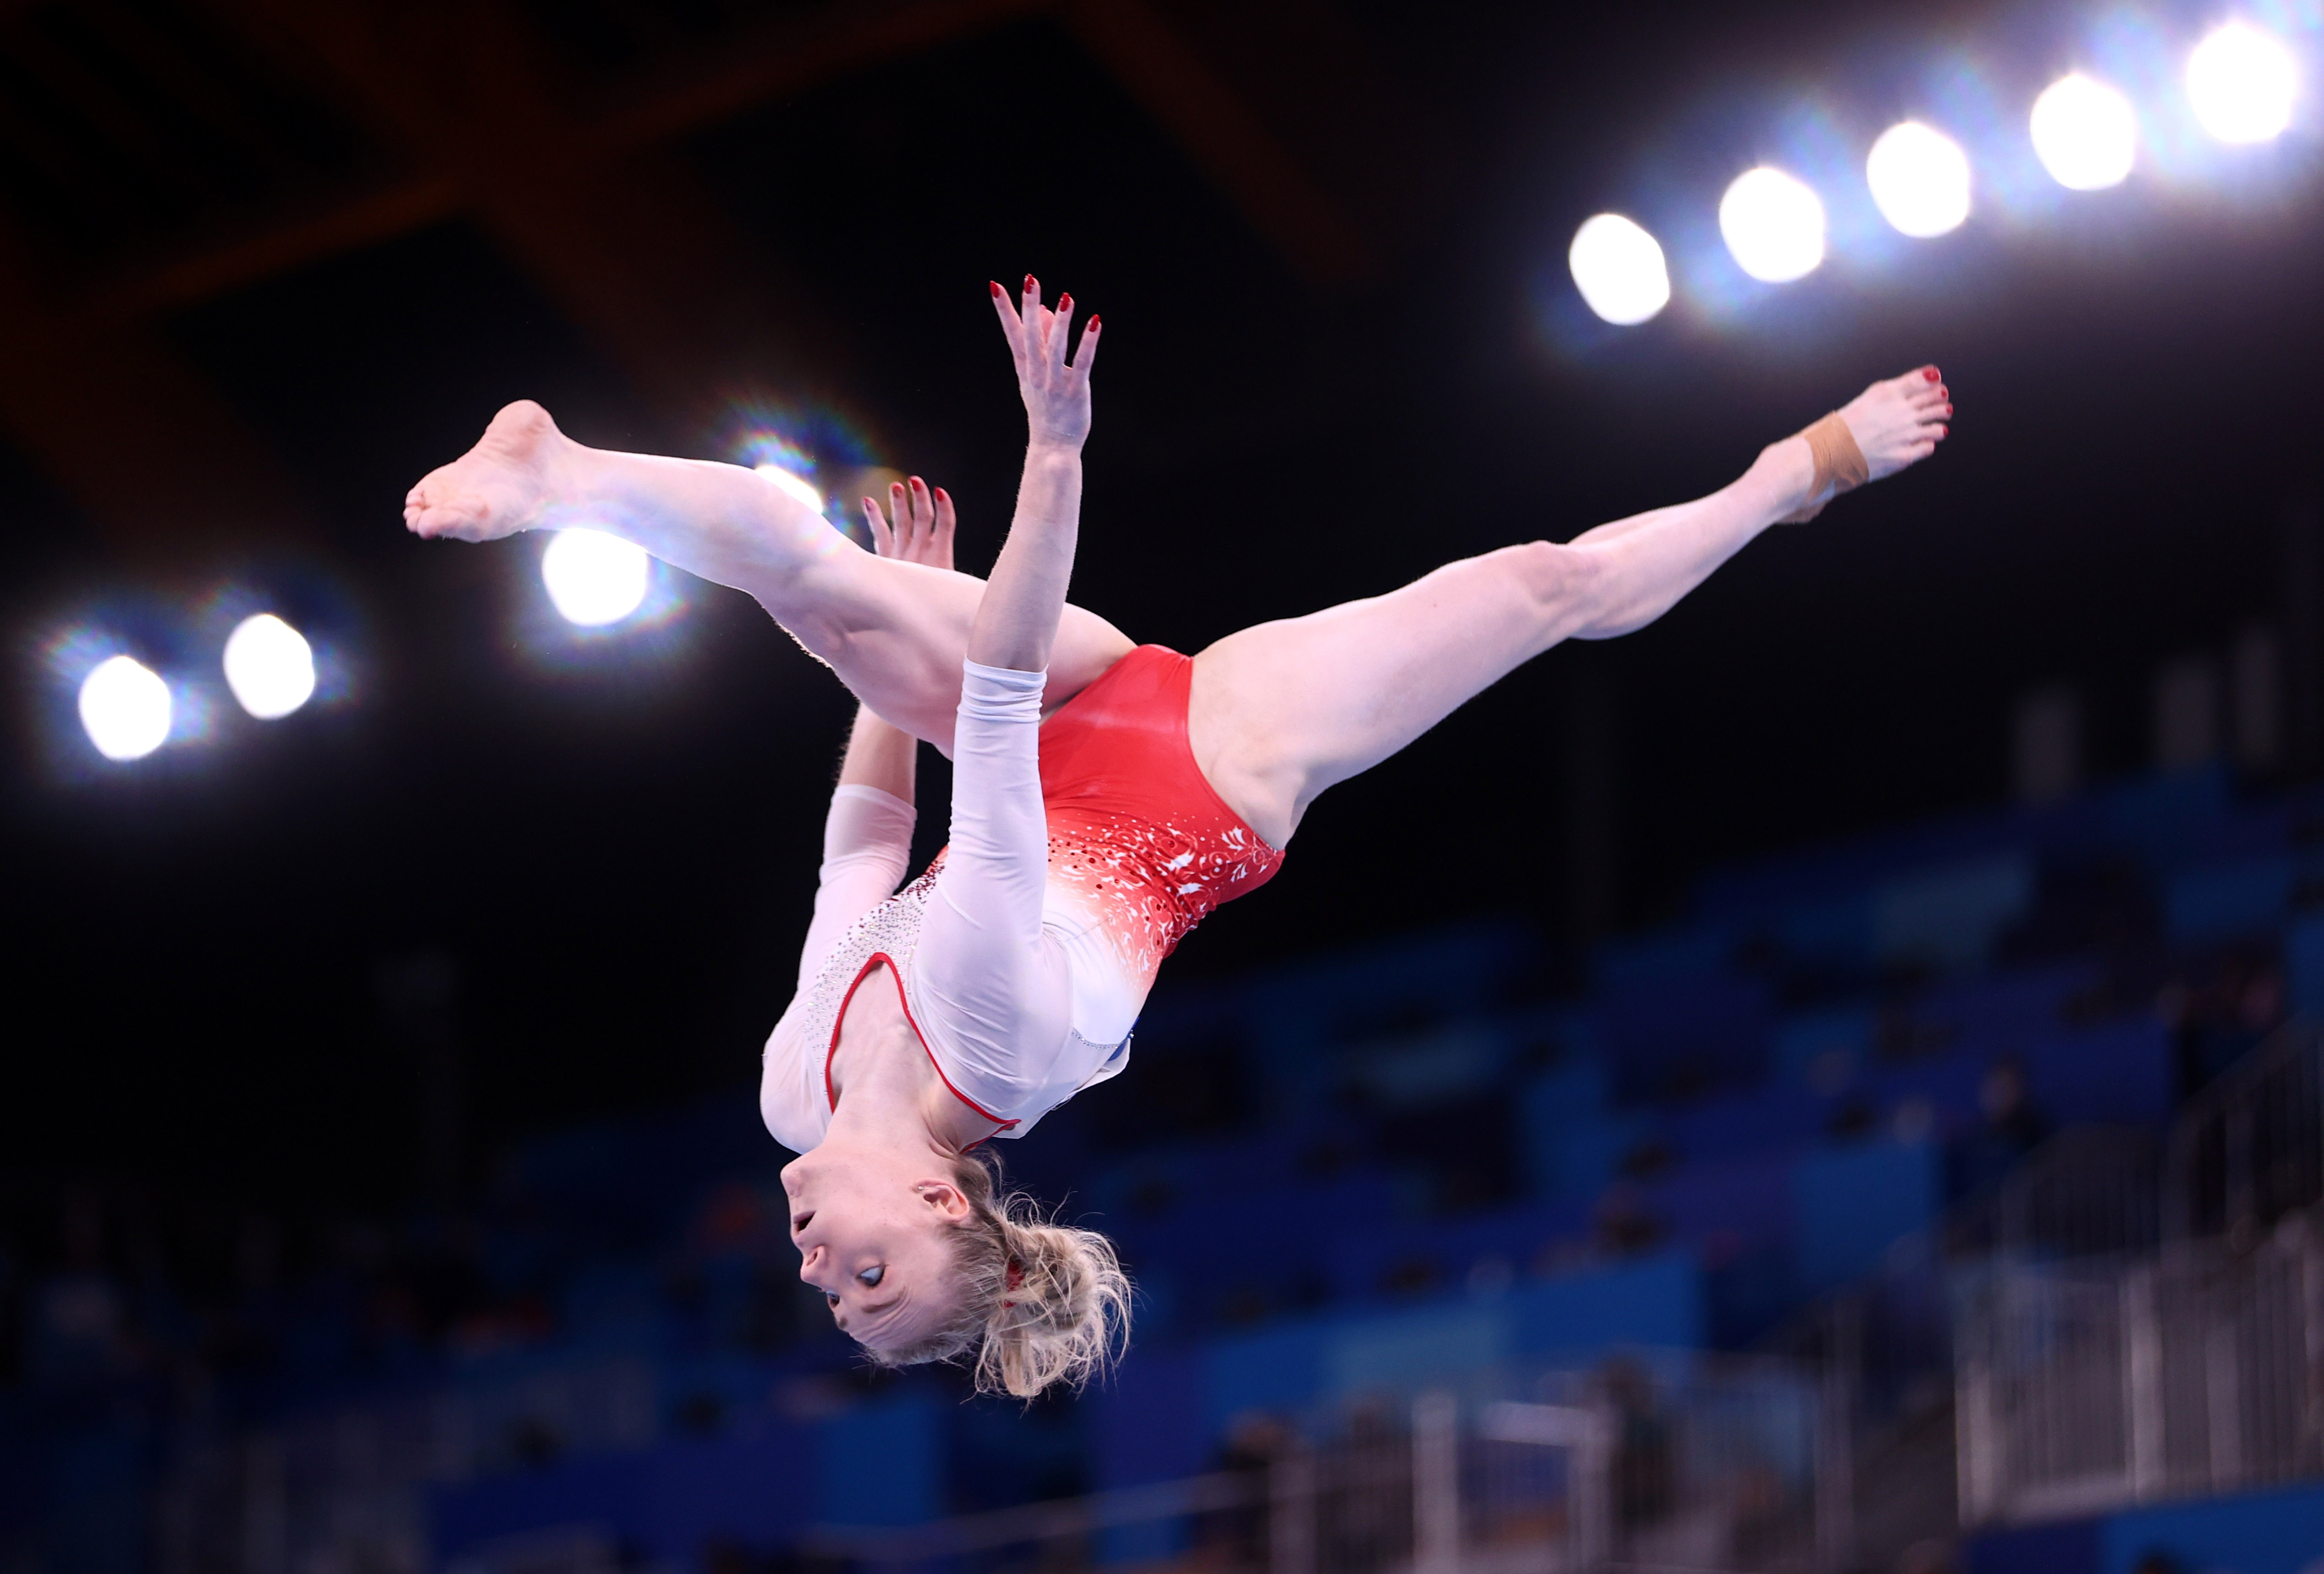 Gymnastics set to be absent from European Games